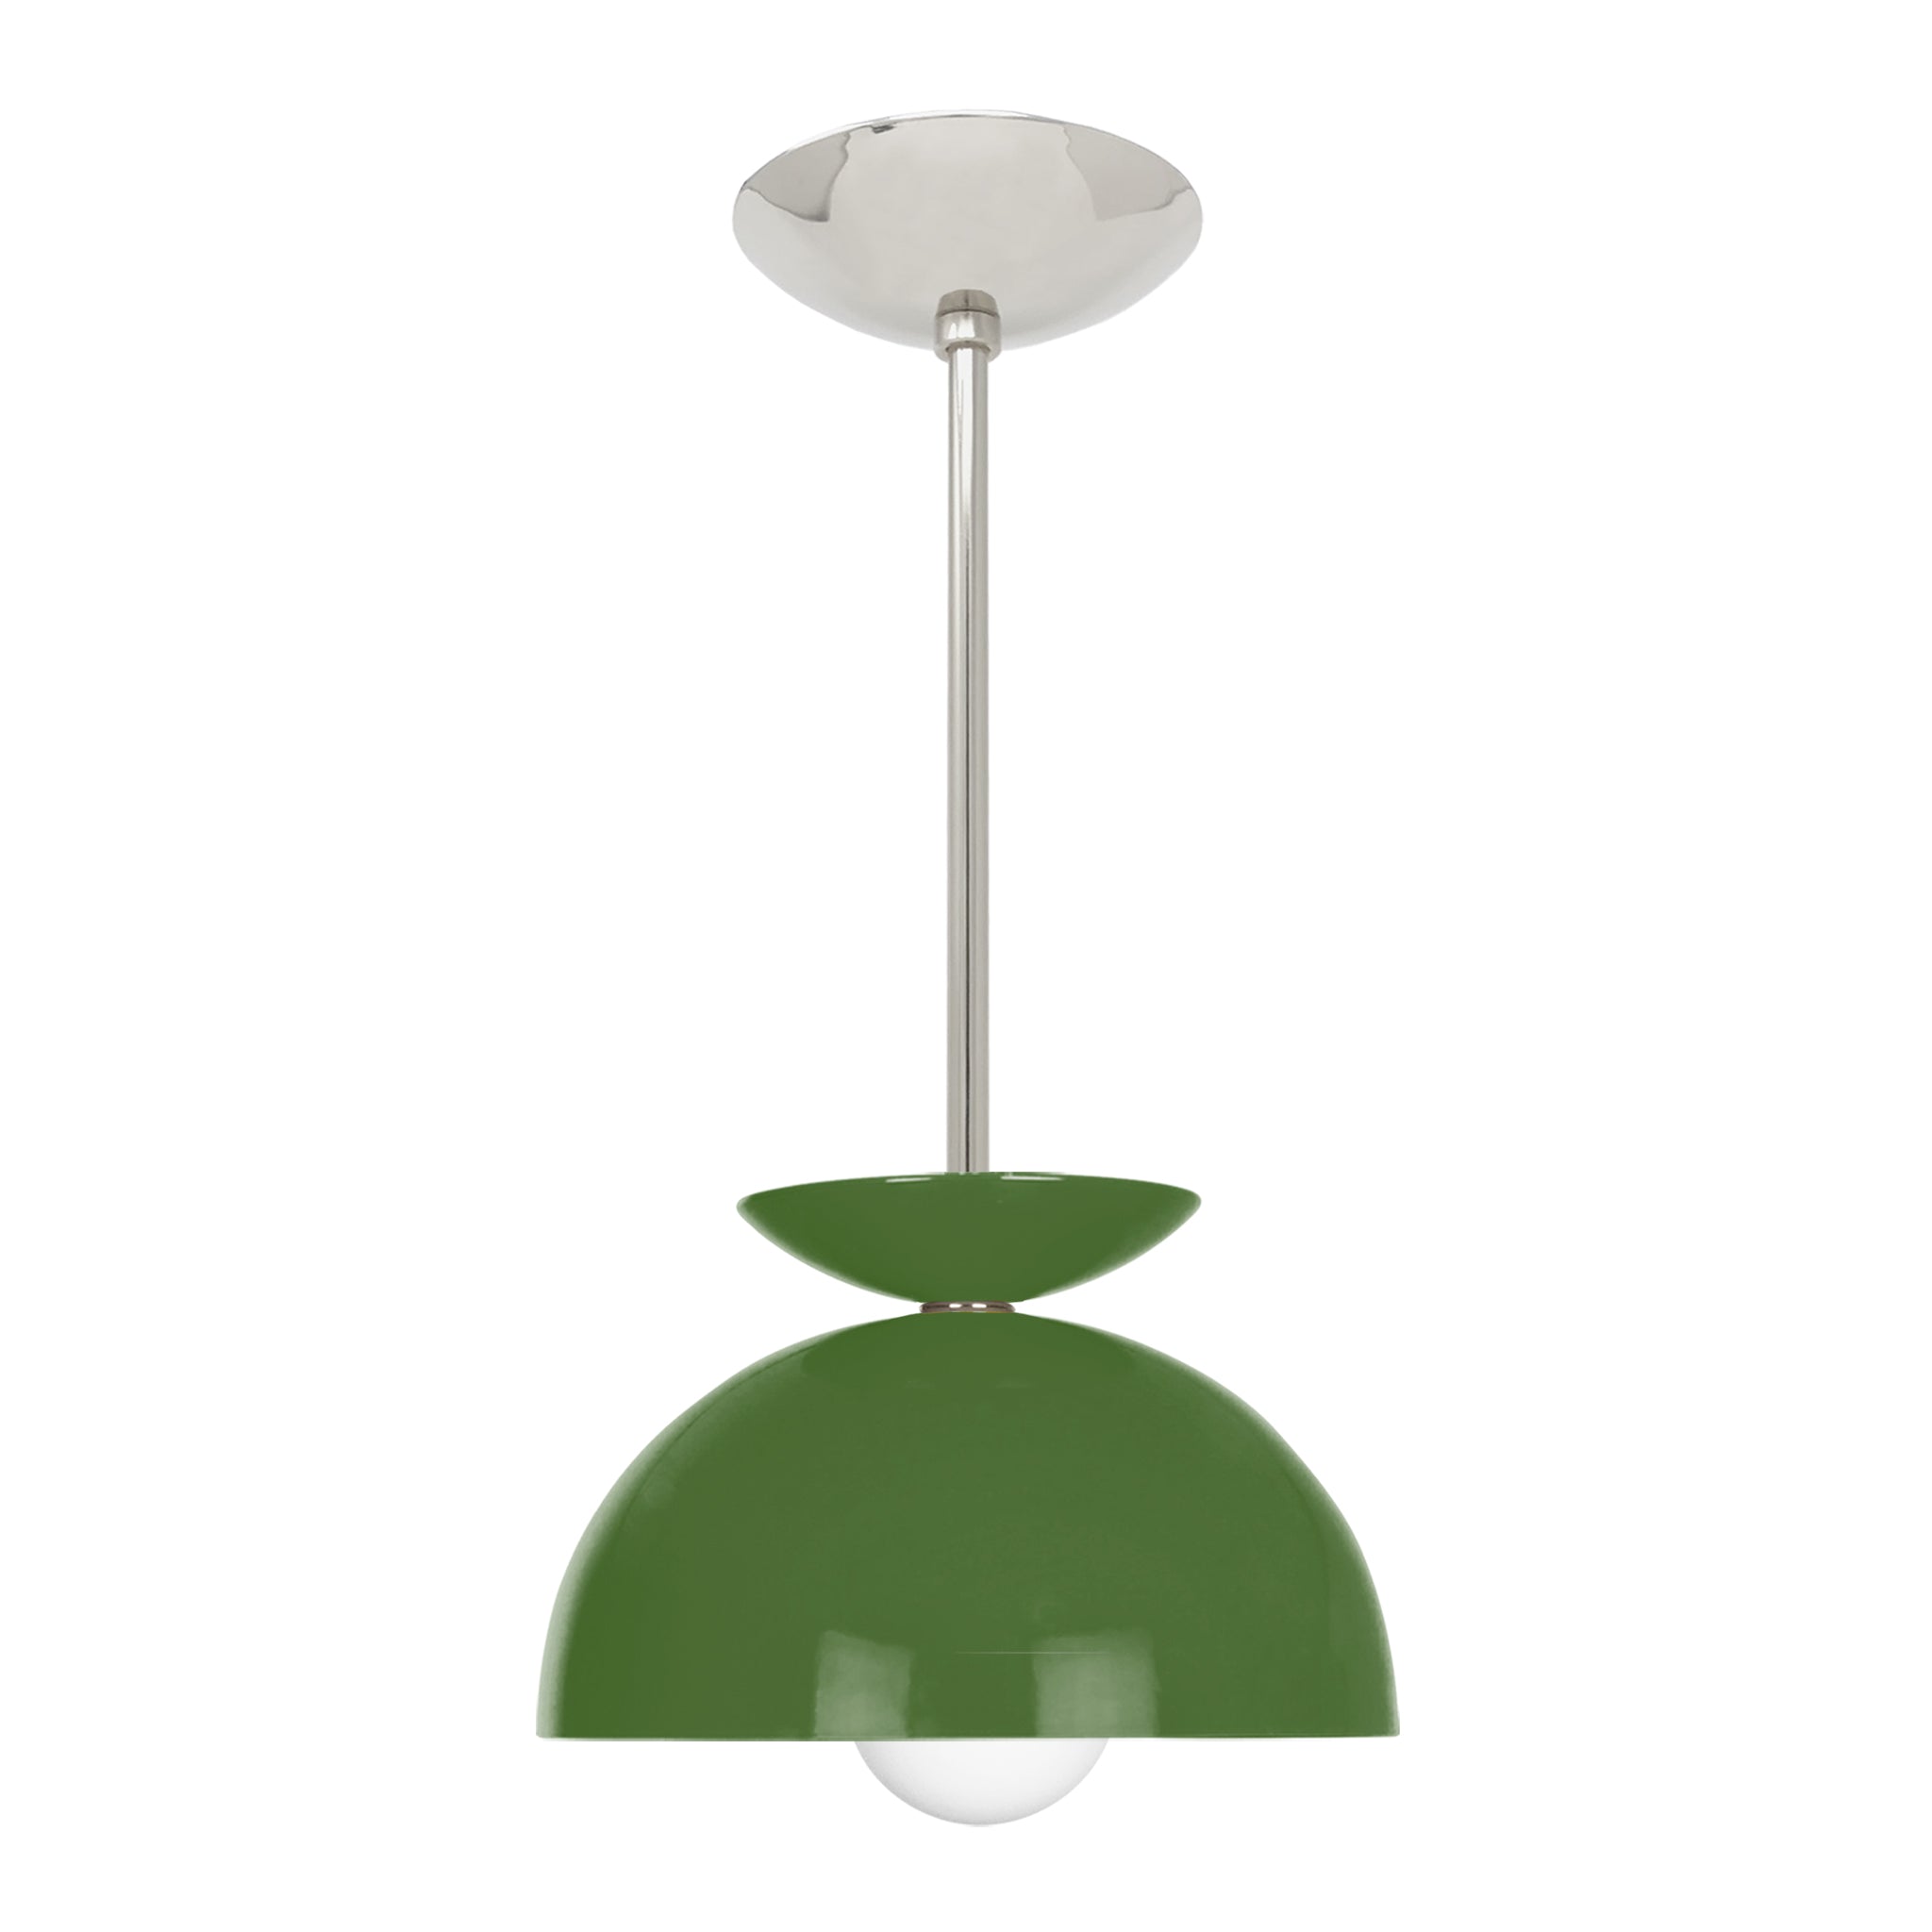 Nickel and python green color Echo pendant 10" Dutton Brown lighting